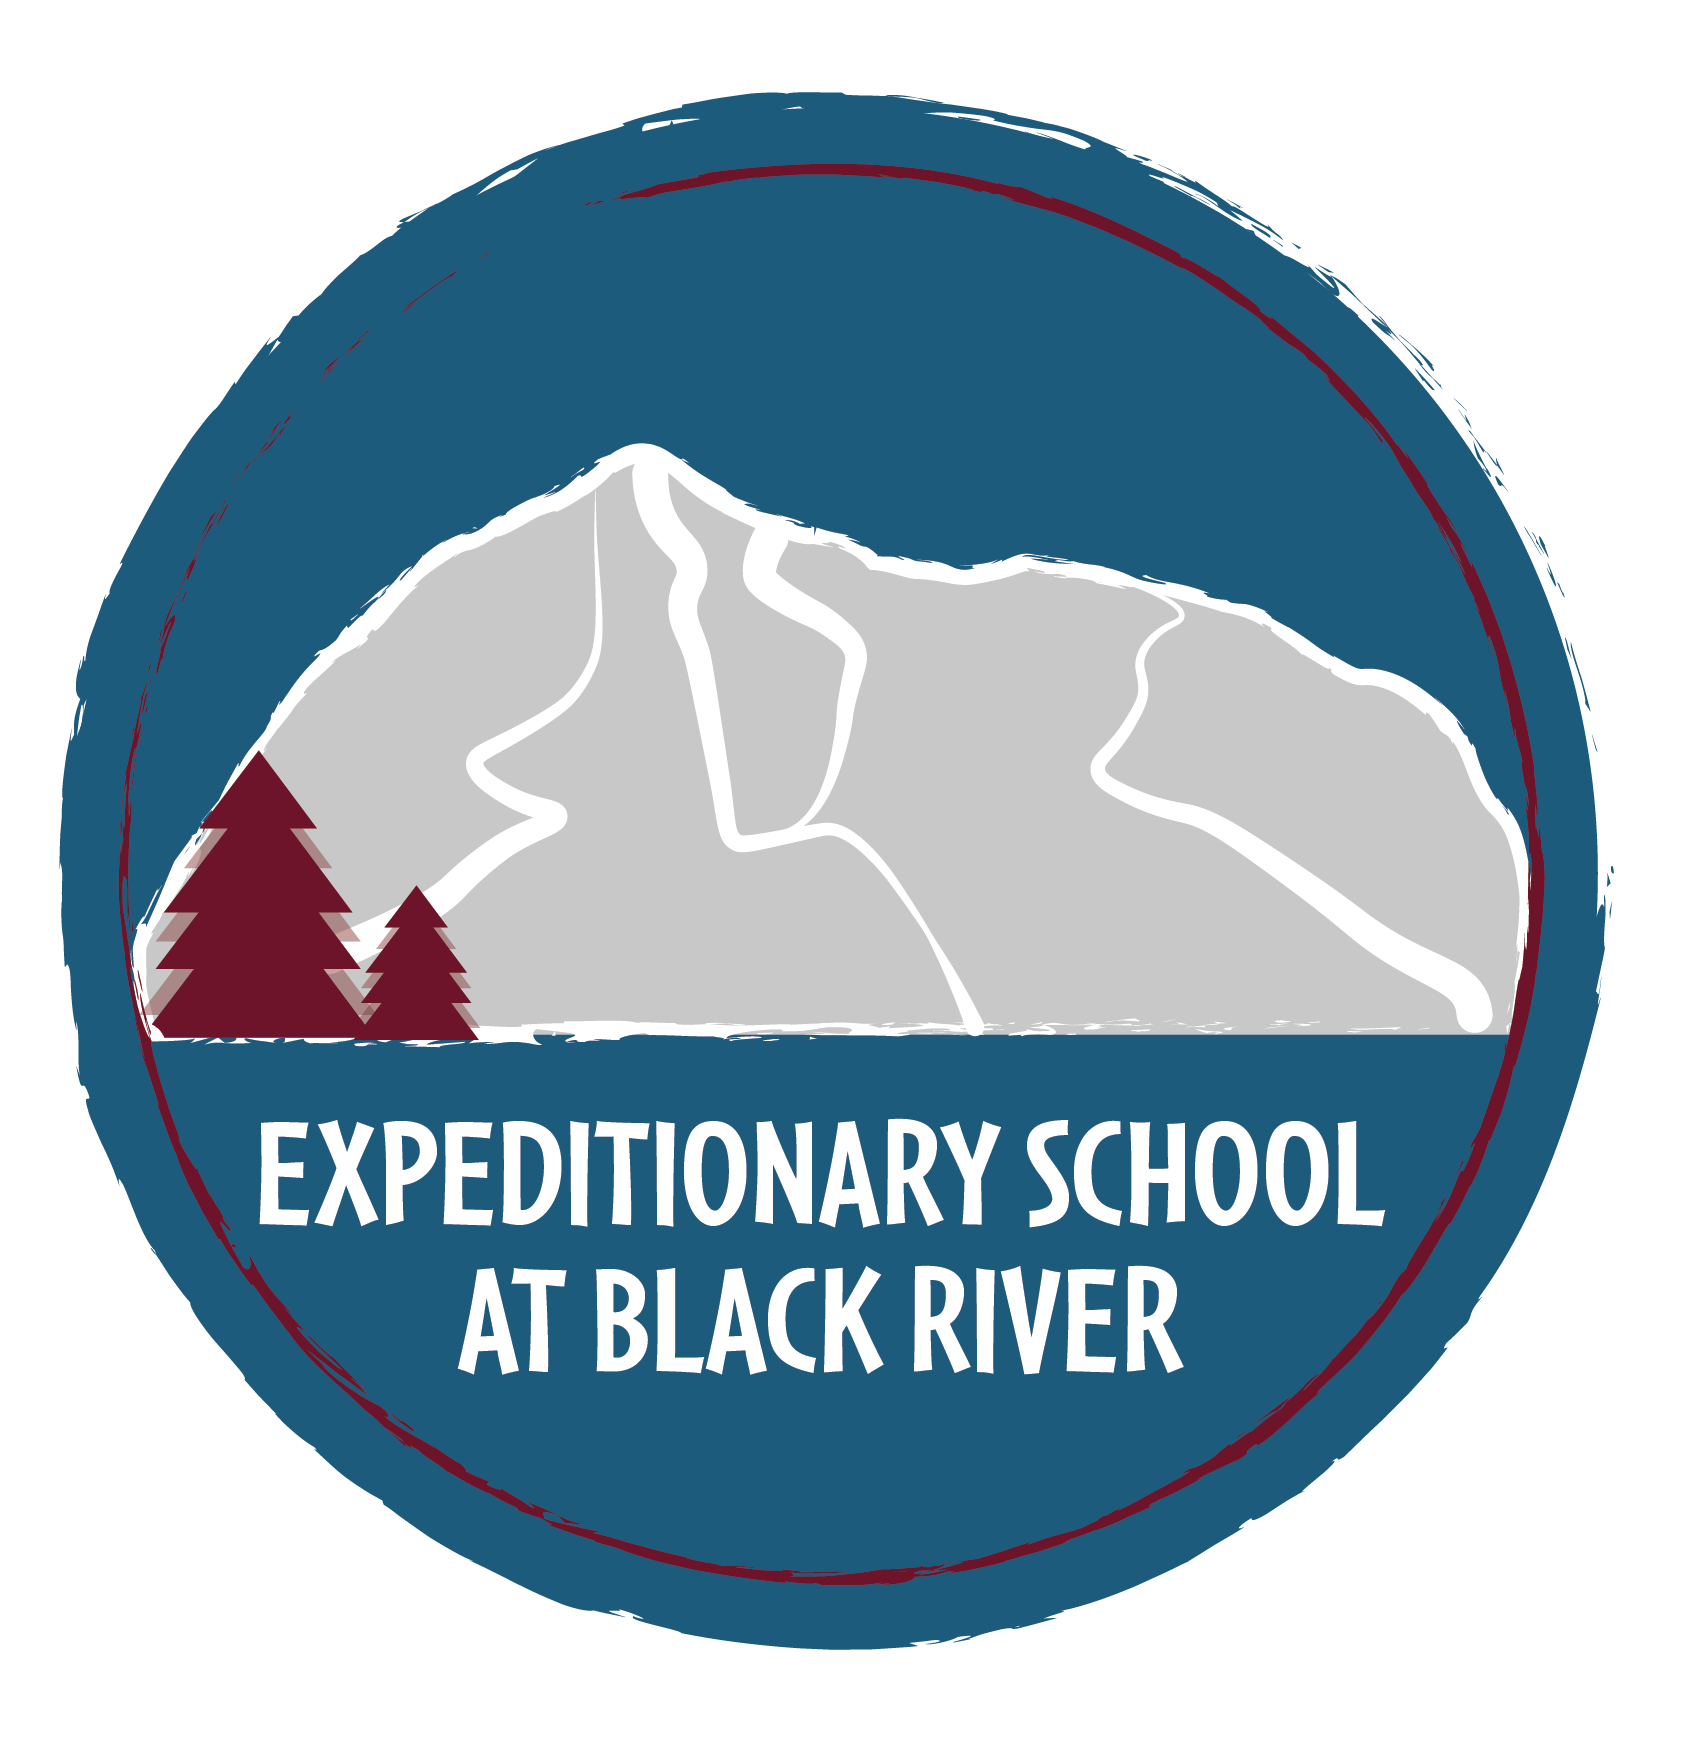 Expeditionary School at Black River